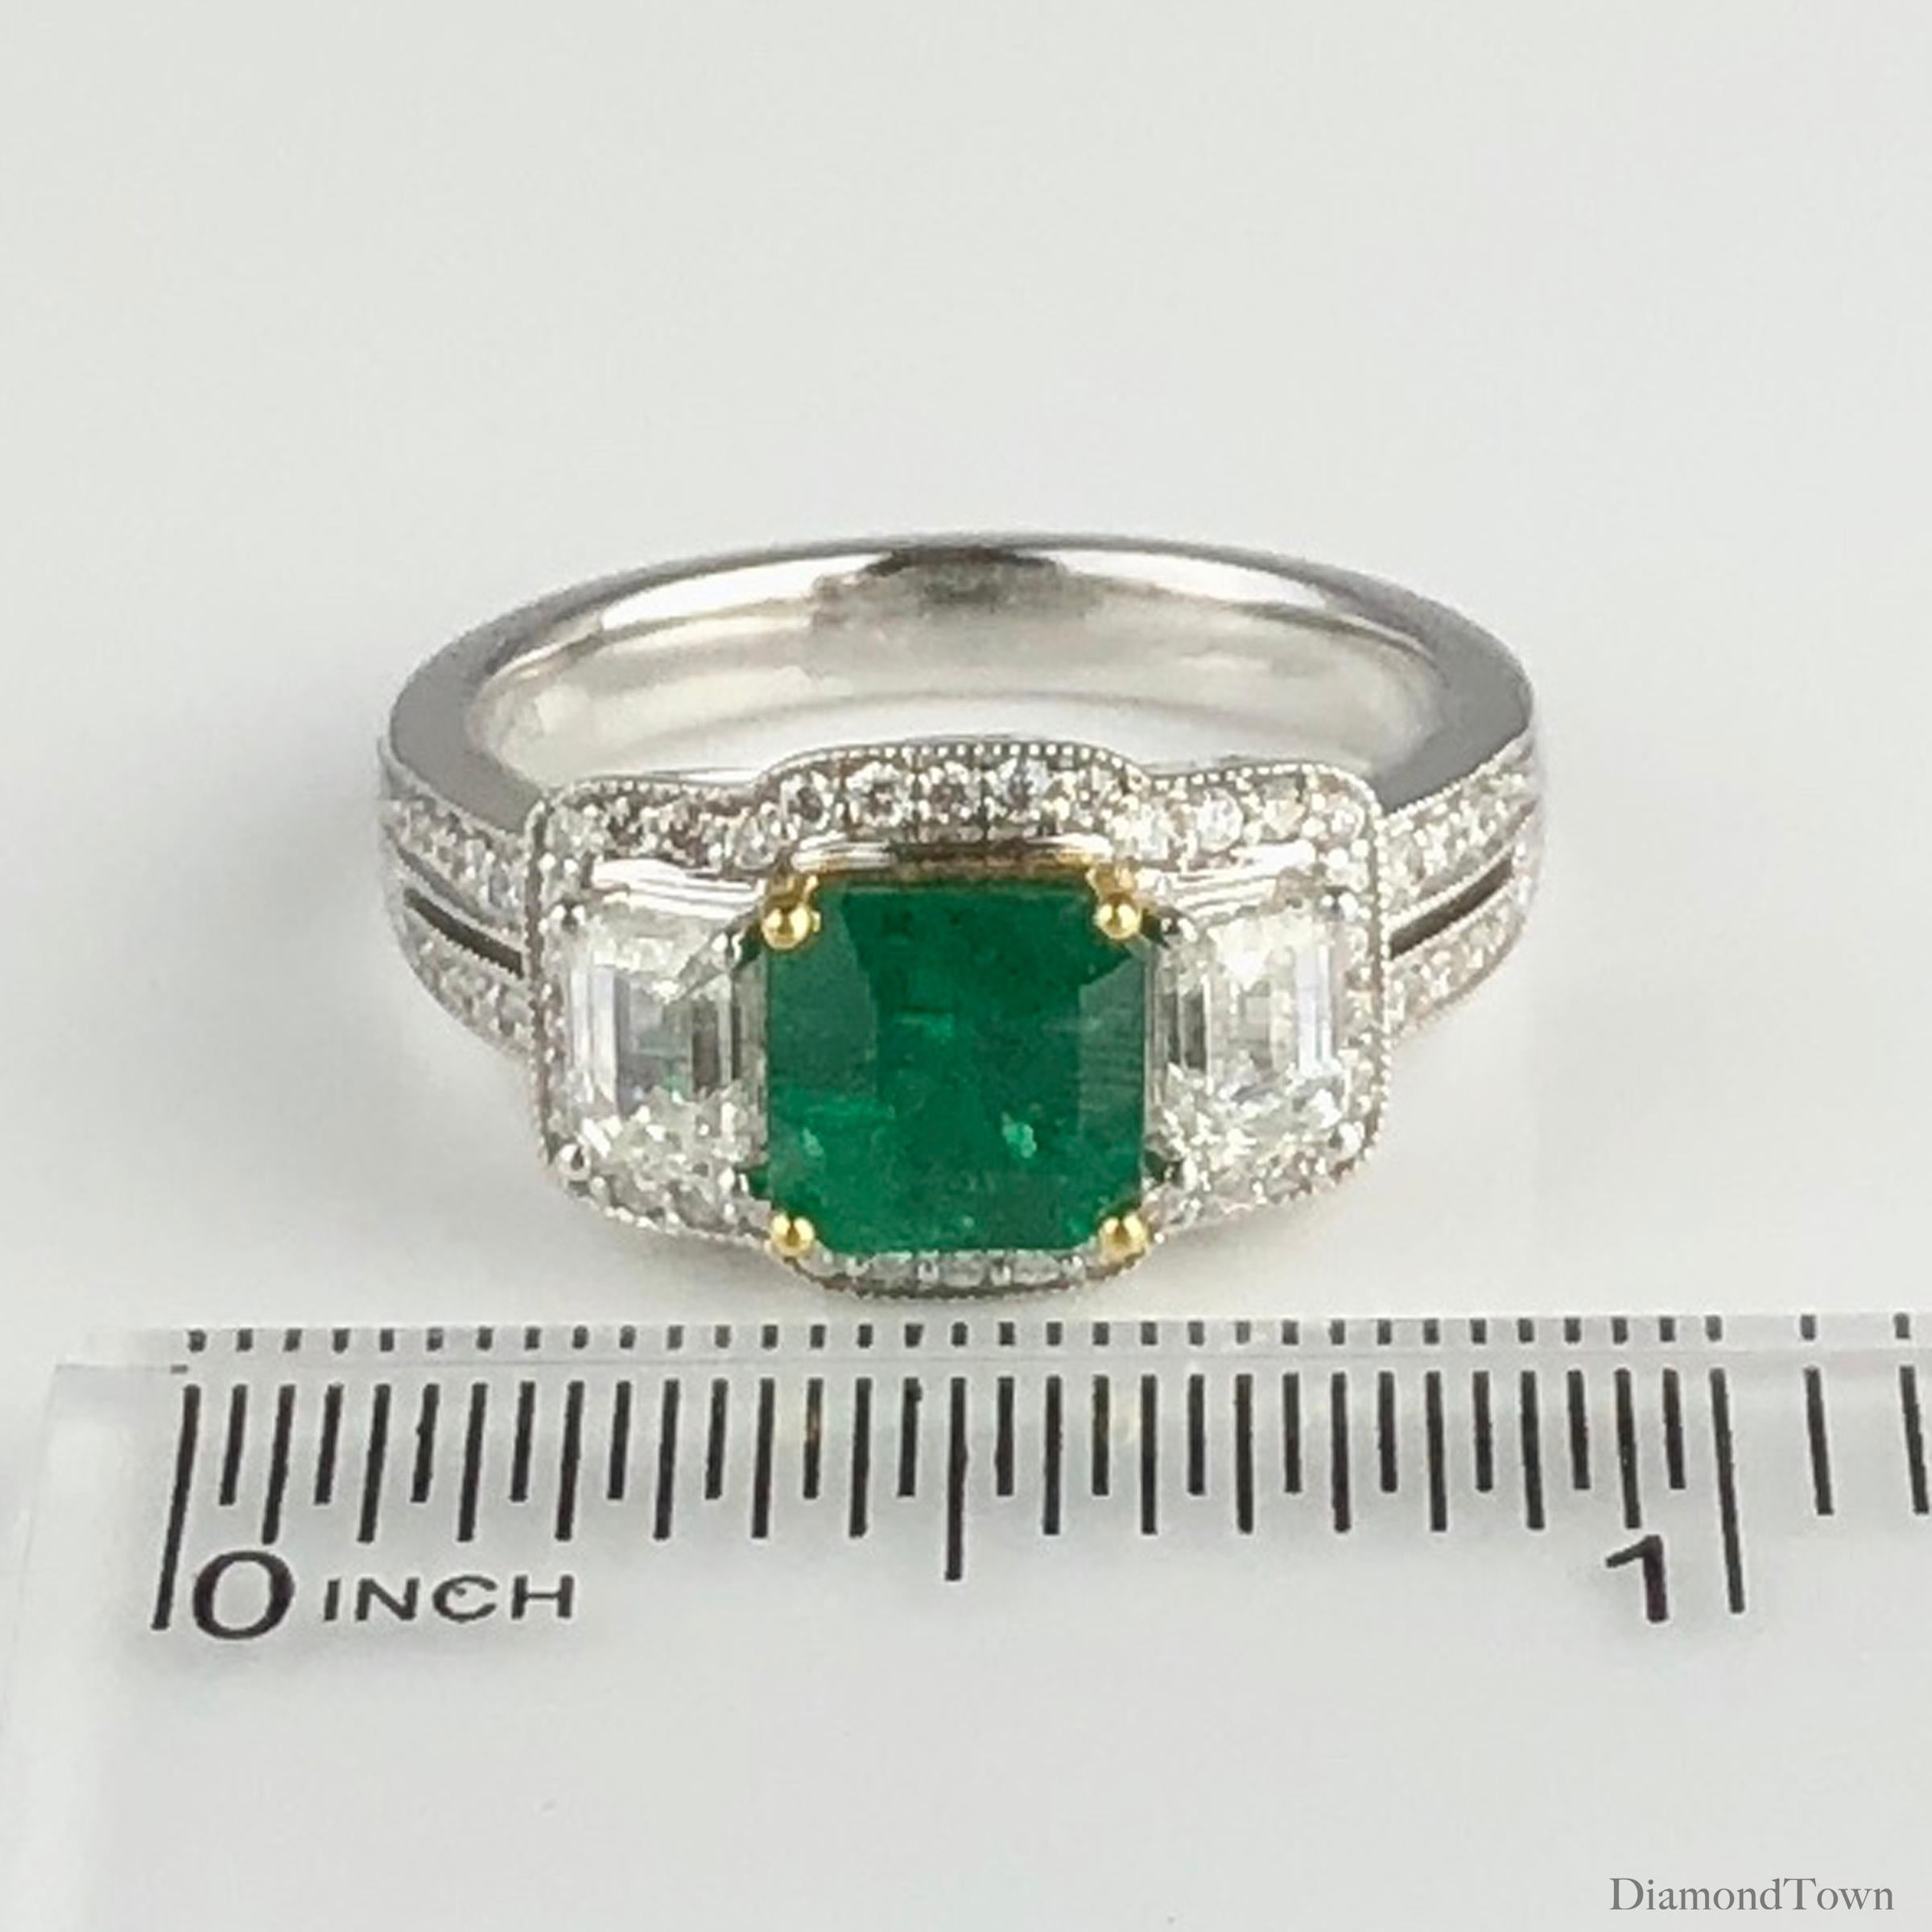 1.10 Carat Cushion Cut Emerald and 1.03 Carat Natural Diamond Ring in 18K ref942 For Sale 1